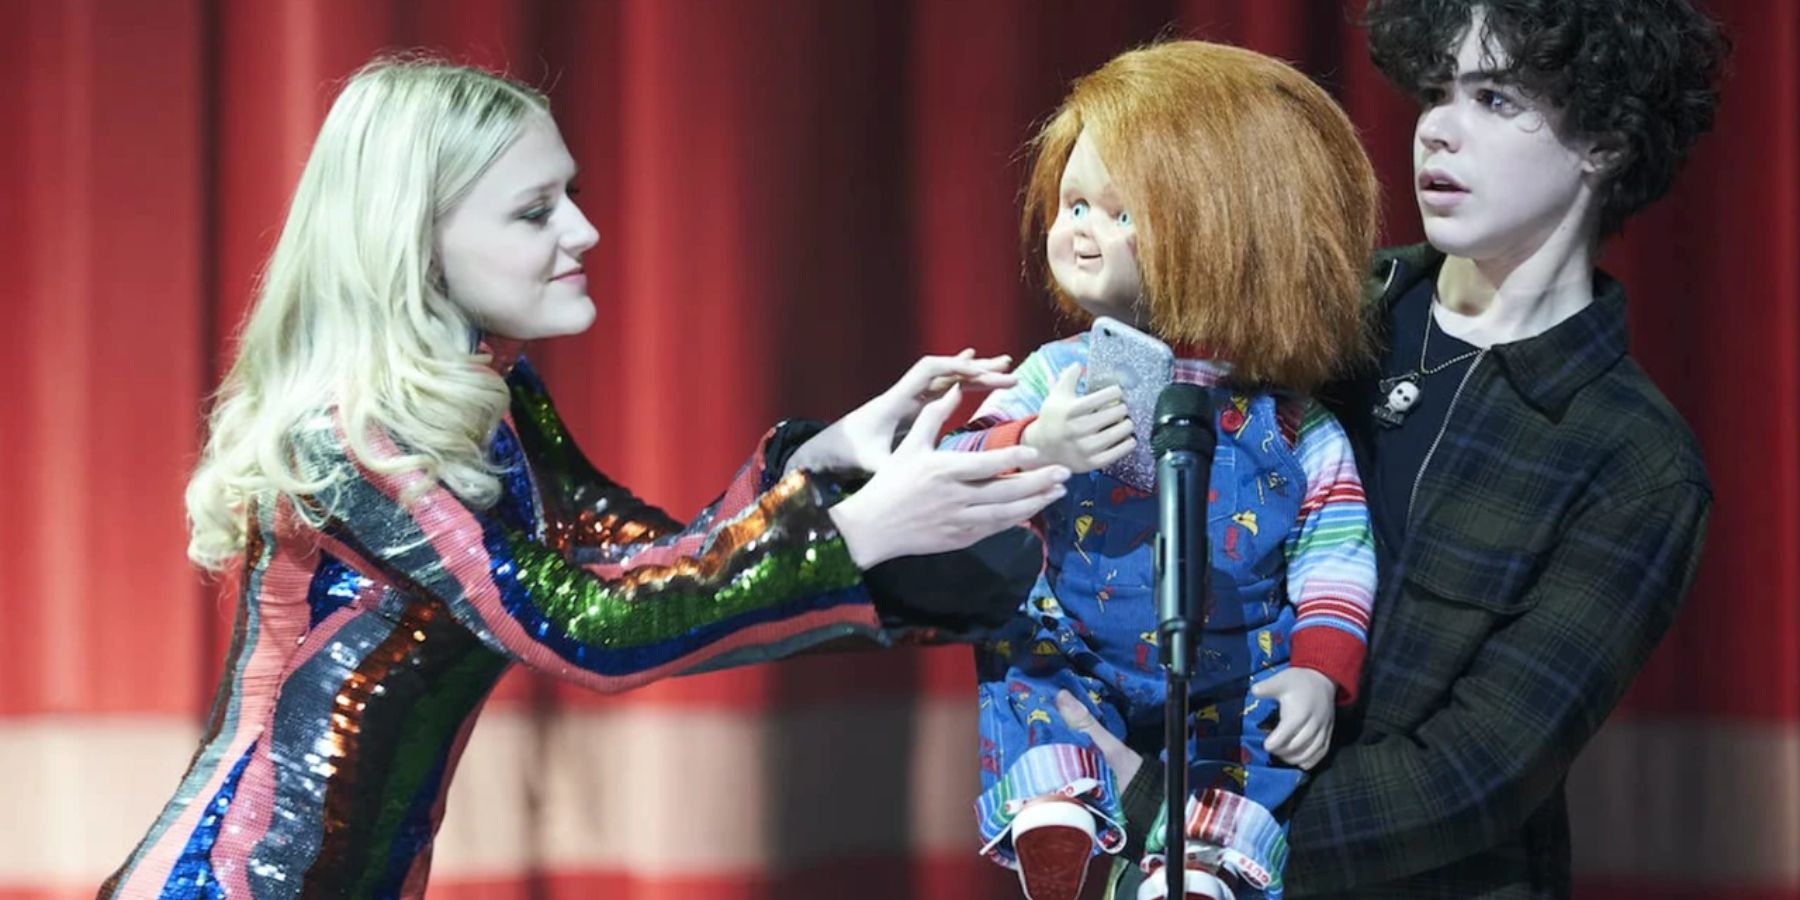 Lexy, Chucky and Jake in Chucky the TV show